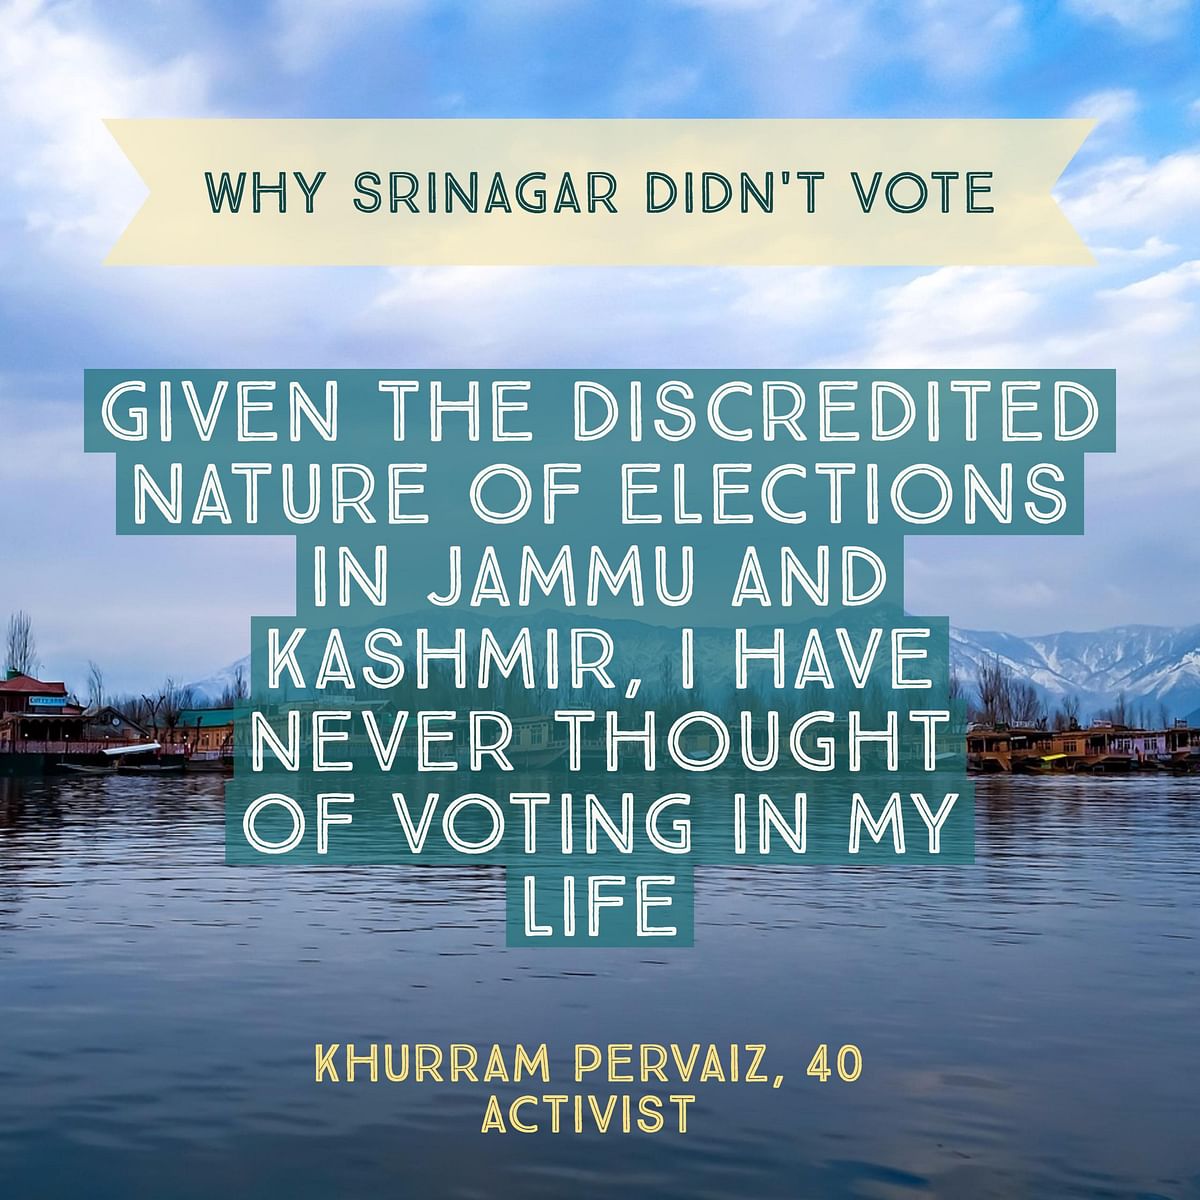 The Srinagar bypoll saw an abysmal 6.5% turnout, the worst poll figure in 30 years of the state’s electoral history.